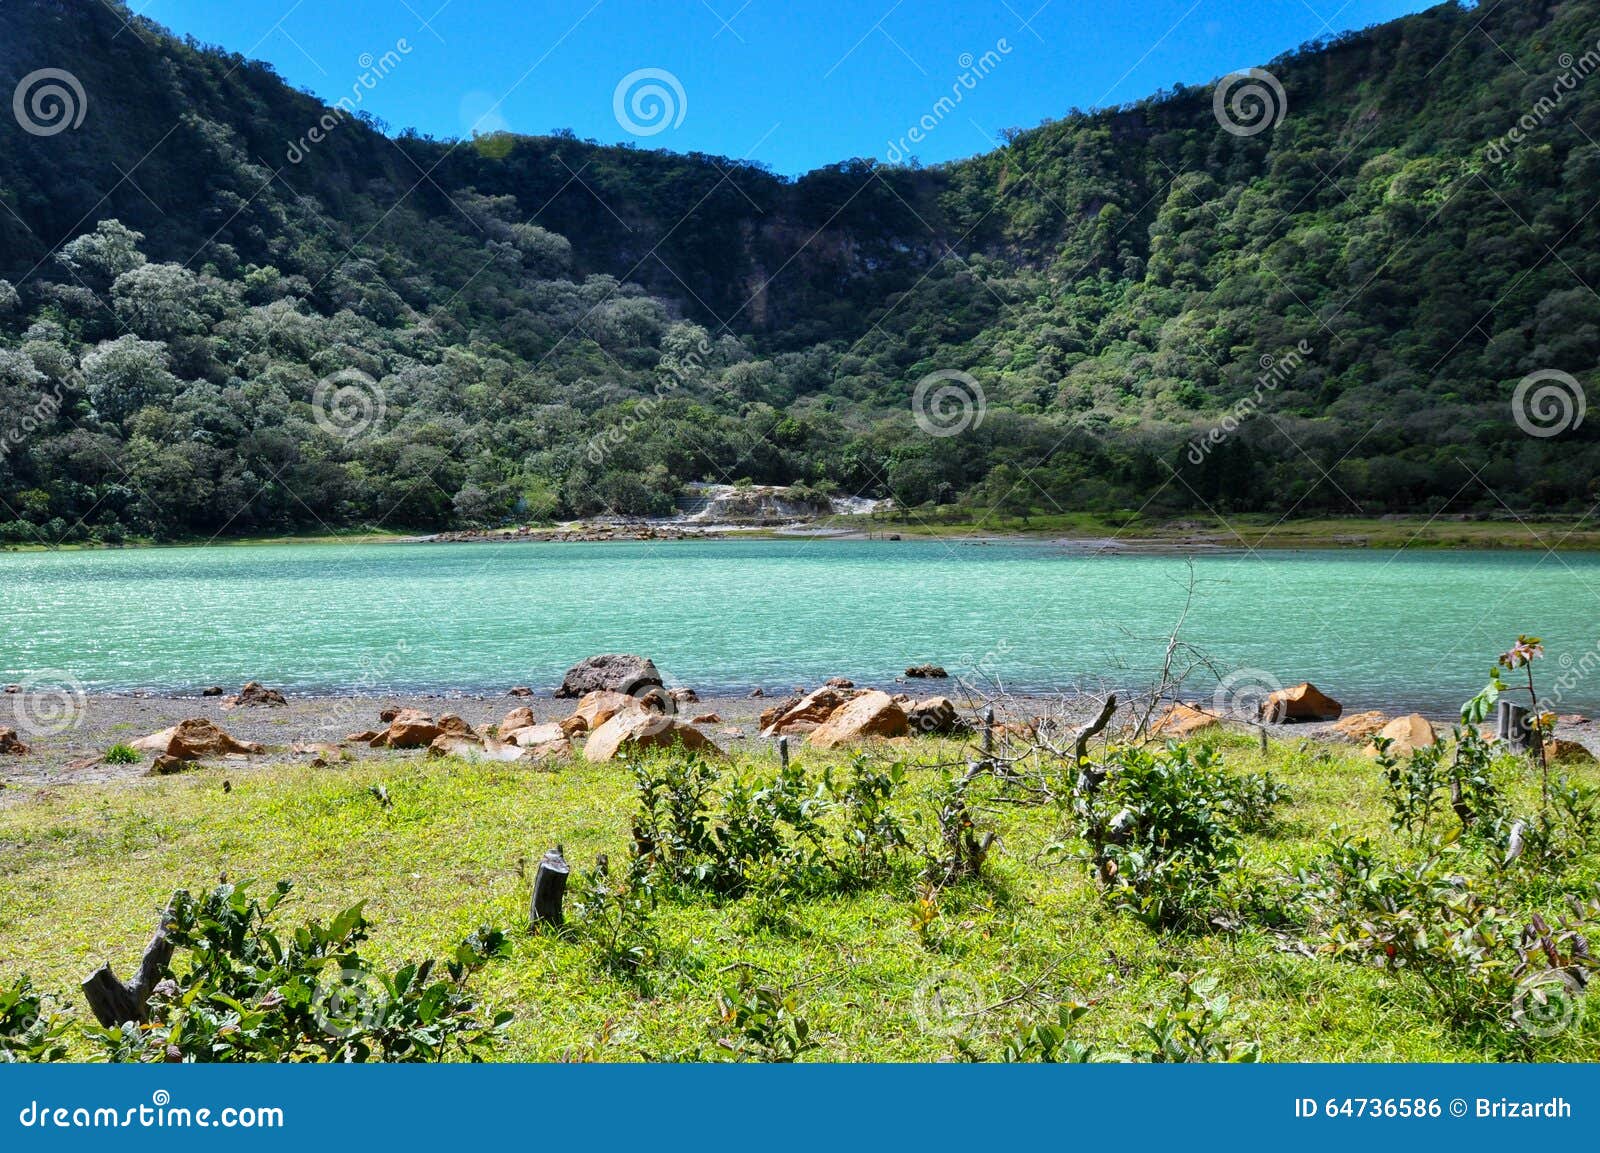 old volcano's crater now turquoise lake, alegria, el salvador